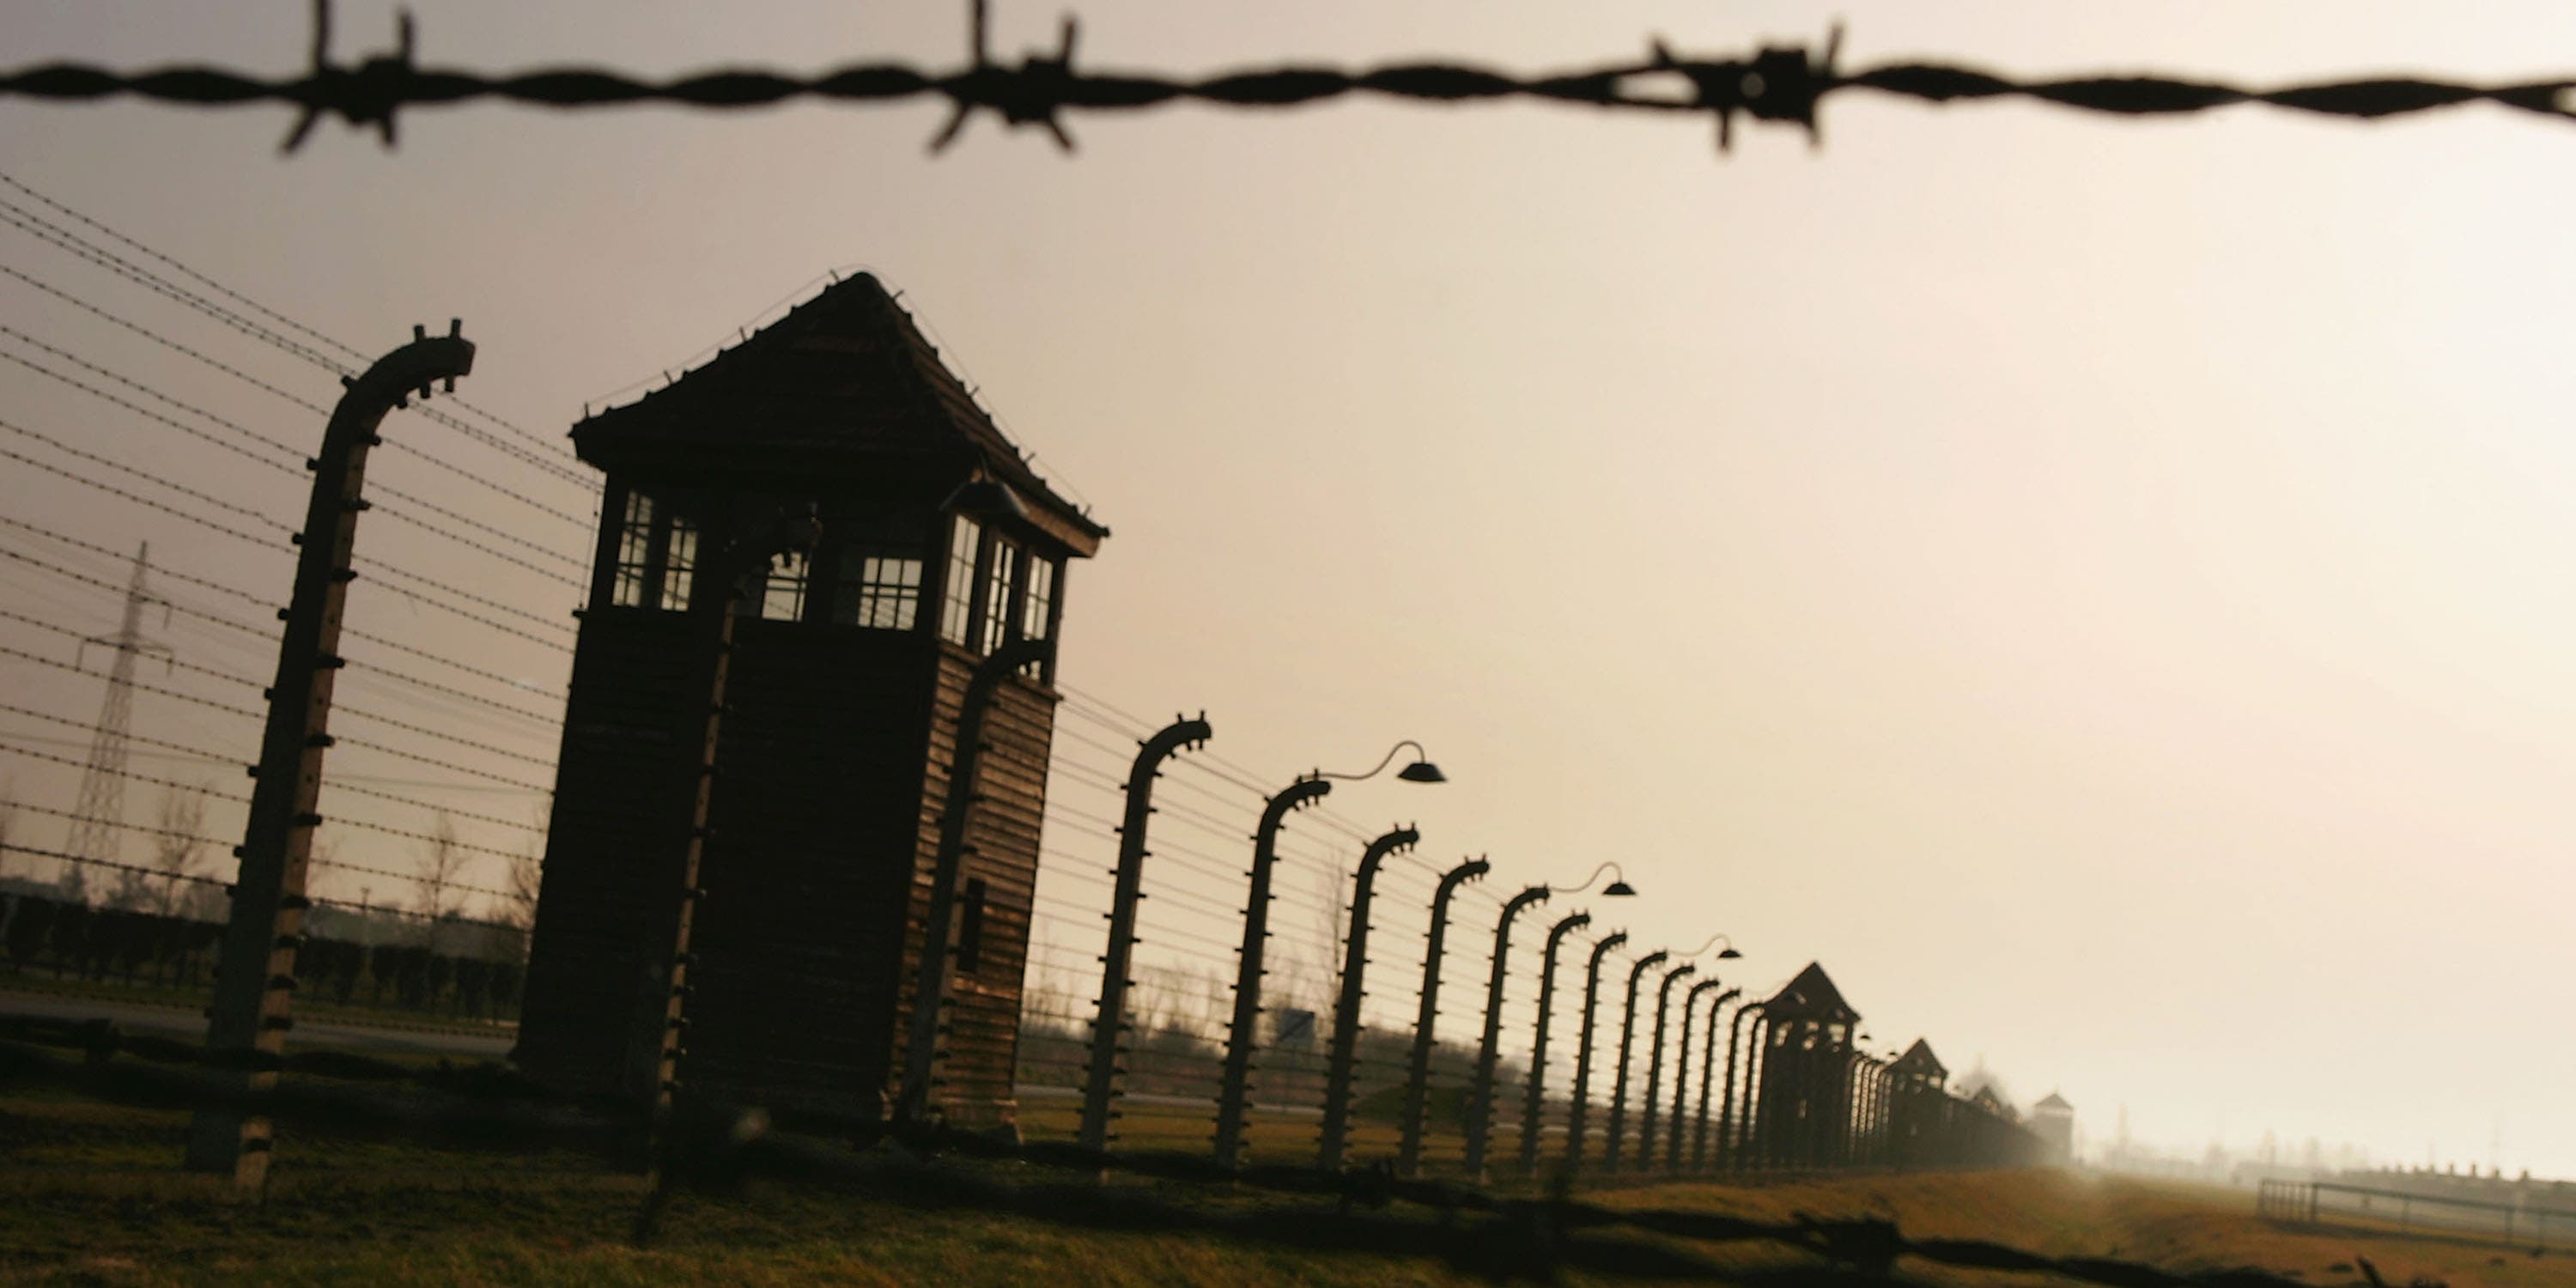 Watch towers surrounded by high voltage fences at Auschwitz II-Birkenau which was built in March 1942. The camp was liberated by the Soviet army on January 27, 1945.